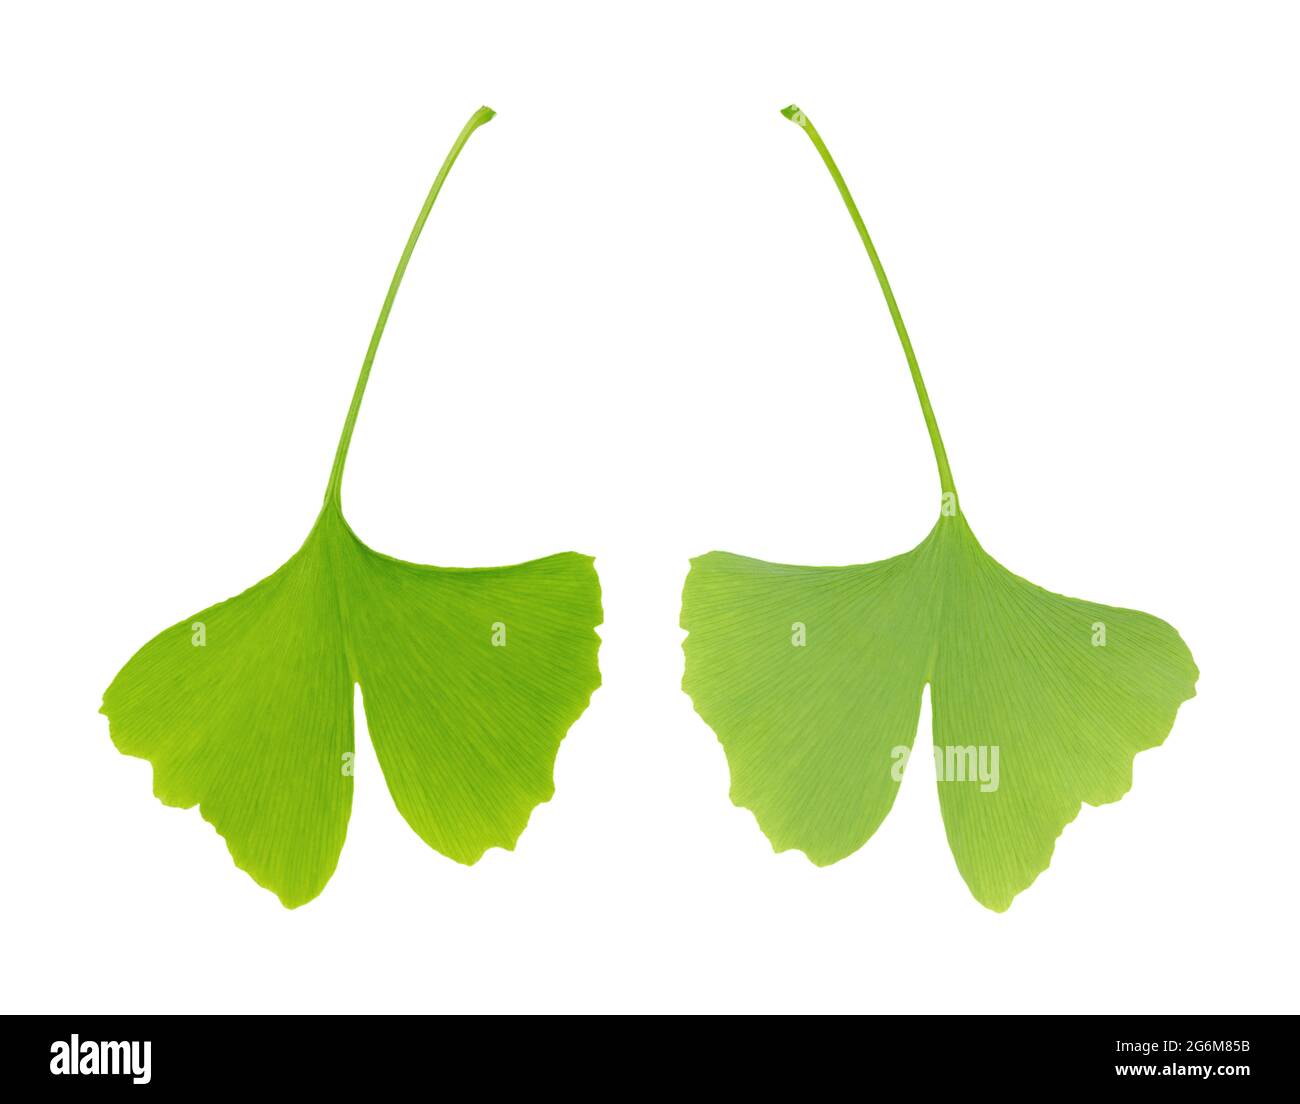 Ginkgo leaf, front and back view, close-up from above. Ginkgo biloba, gingko or maidenhair tree. The leaf is a symbol for Tokyo, the capital of Japan. Stock Photo